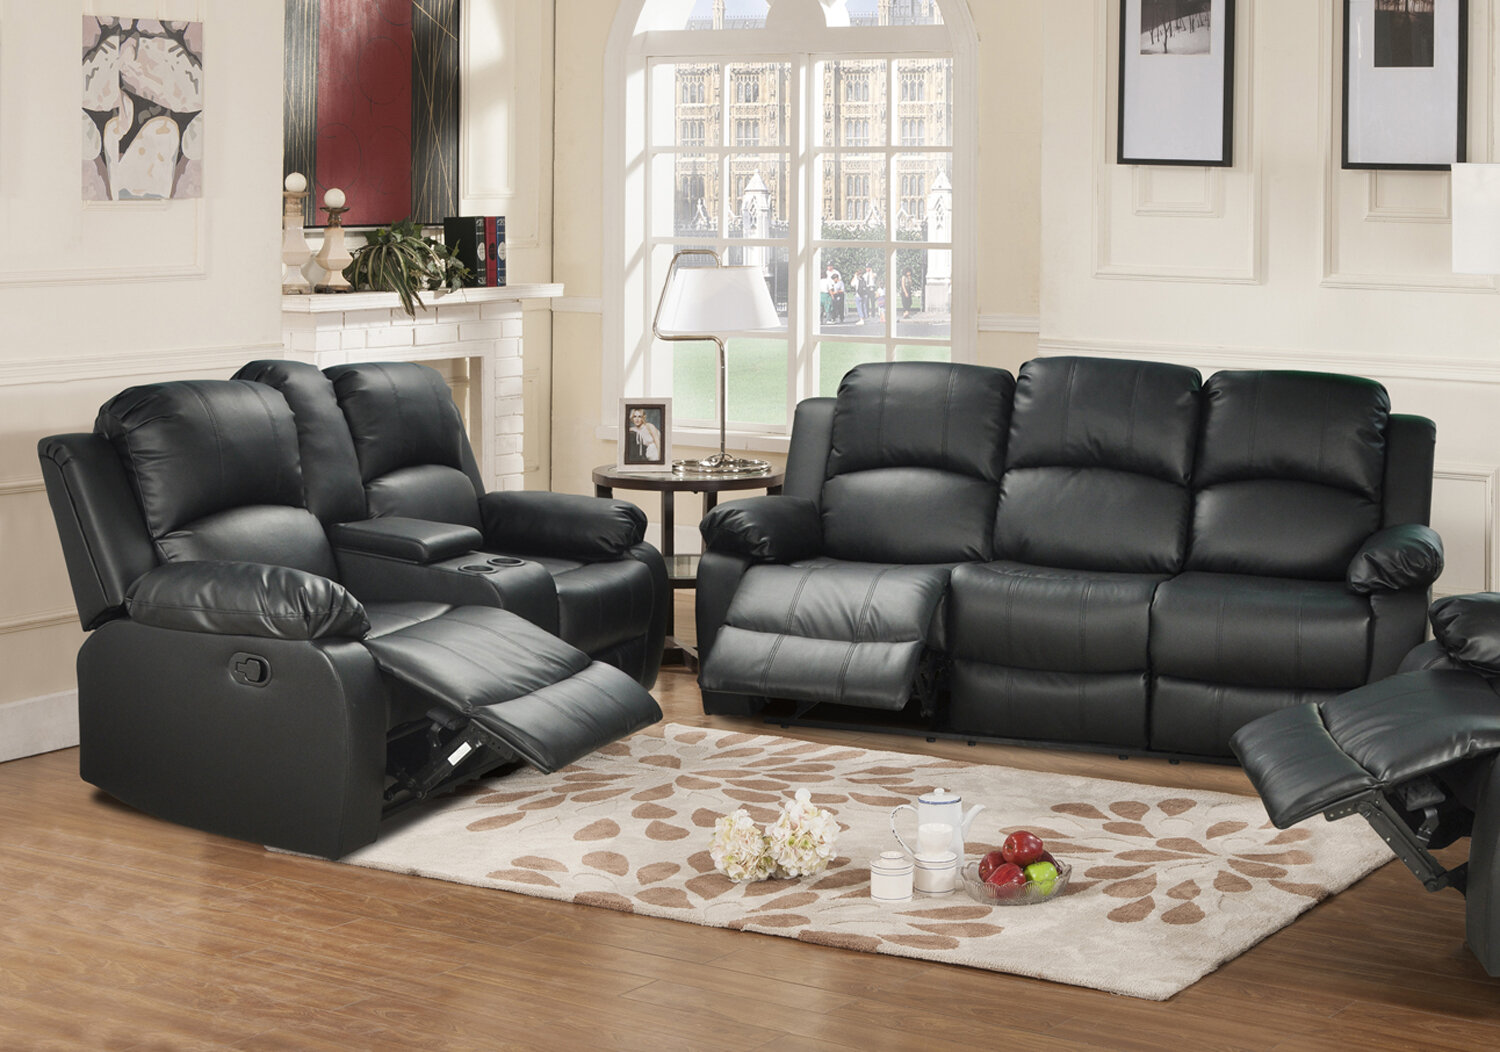 Clarine 2 Piece Faux Leather Reclining Living Room Set